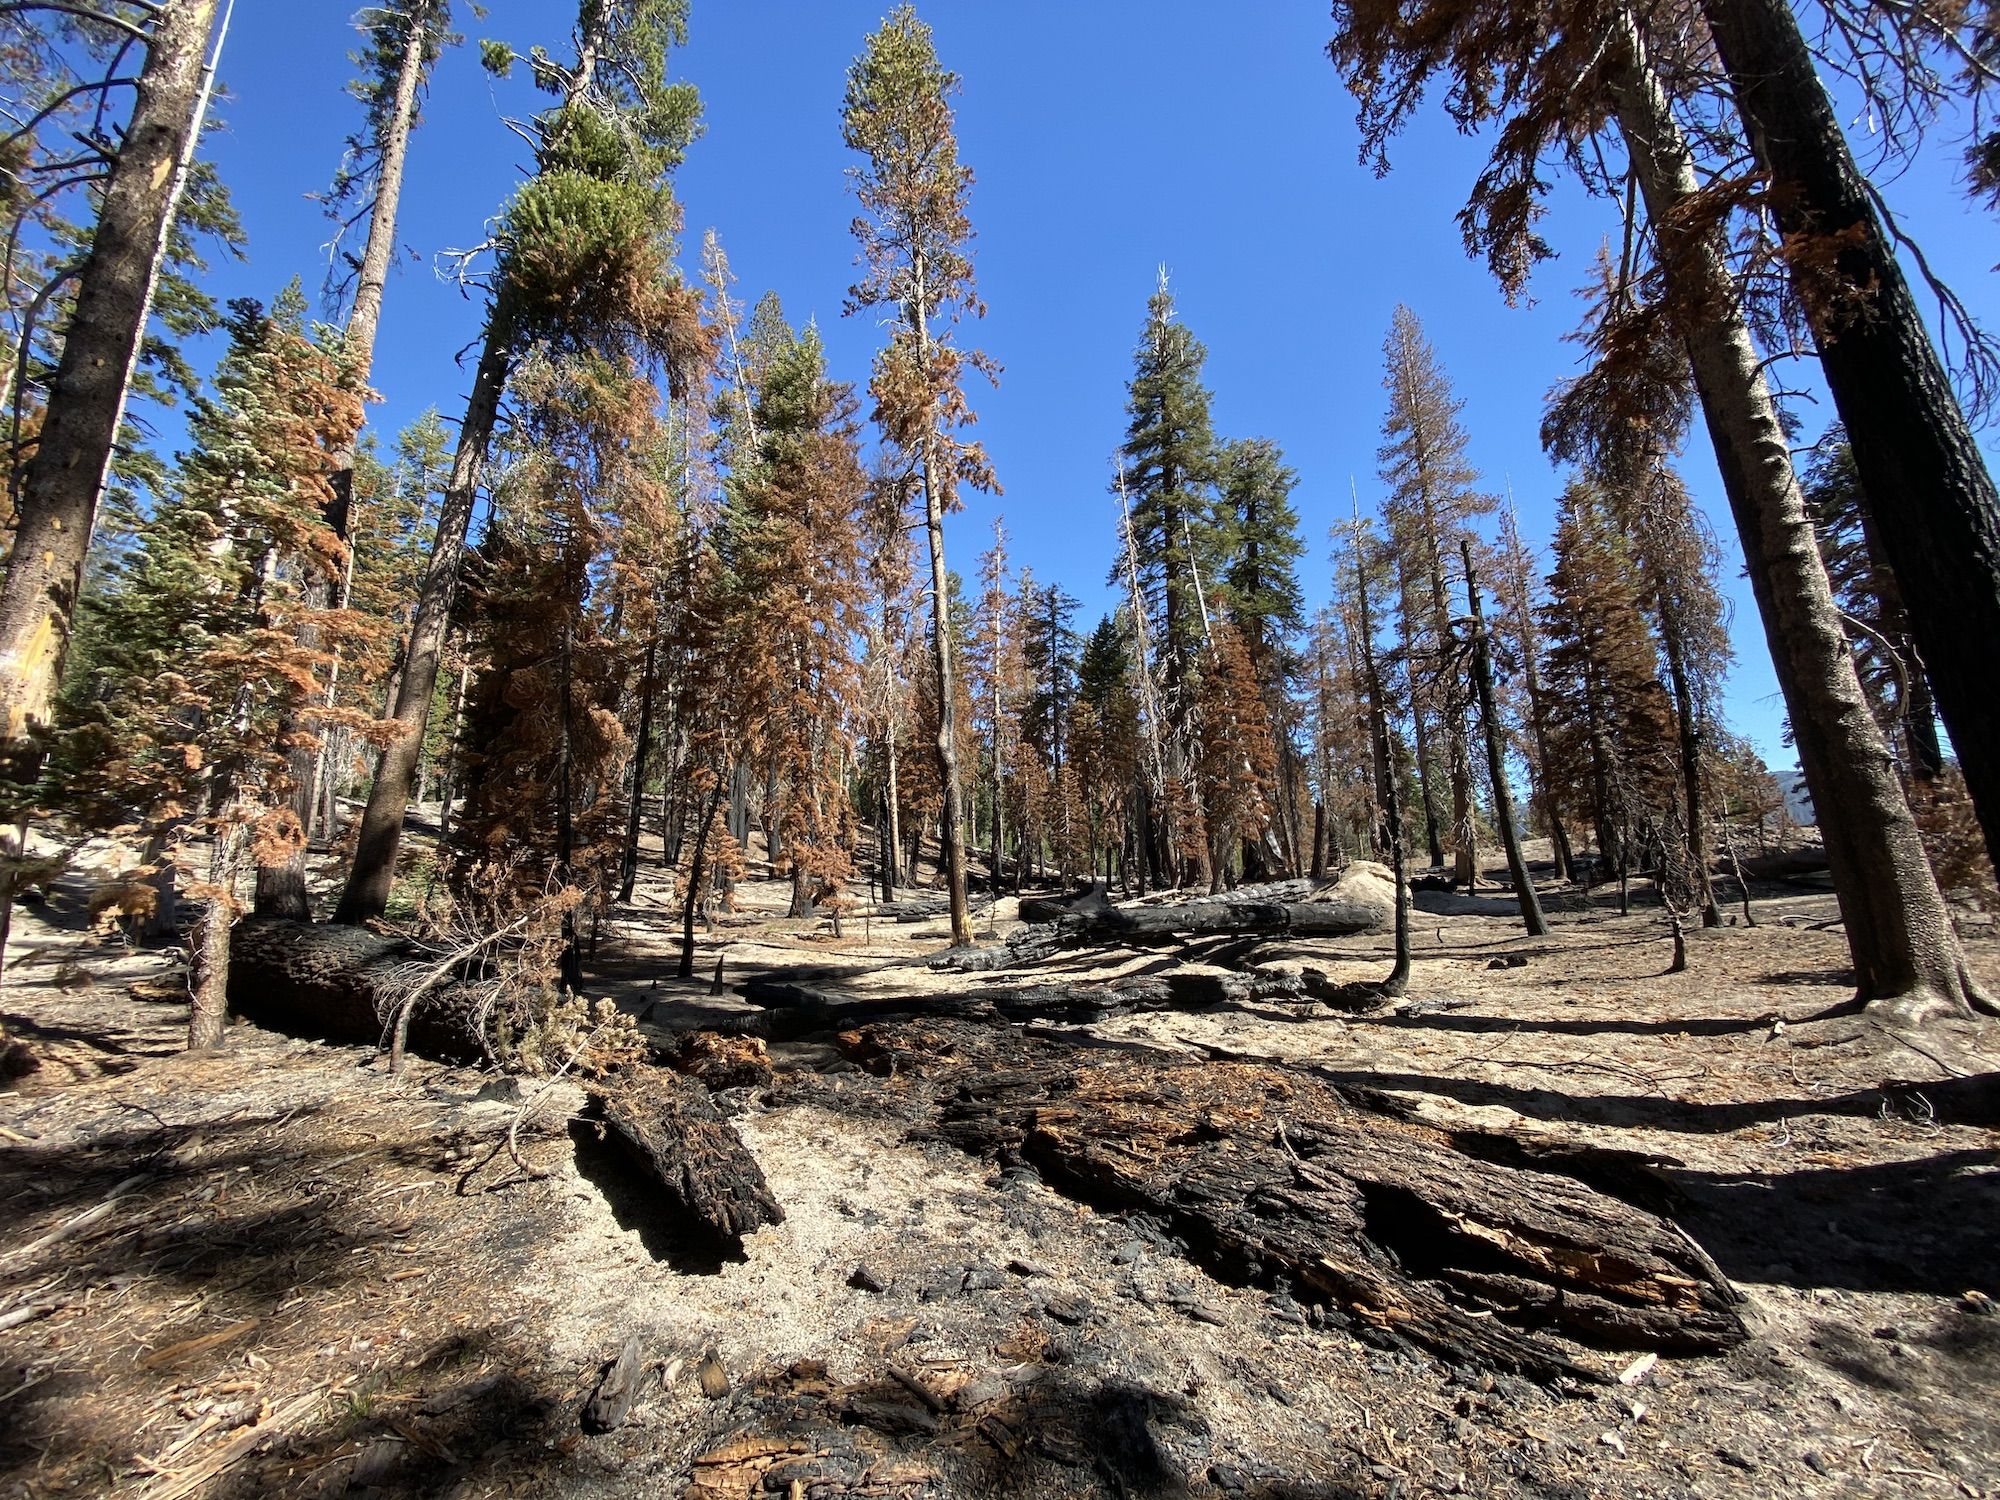 A burned forest floor, the tops of the trees are still green while the bottoms are black.